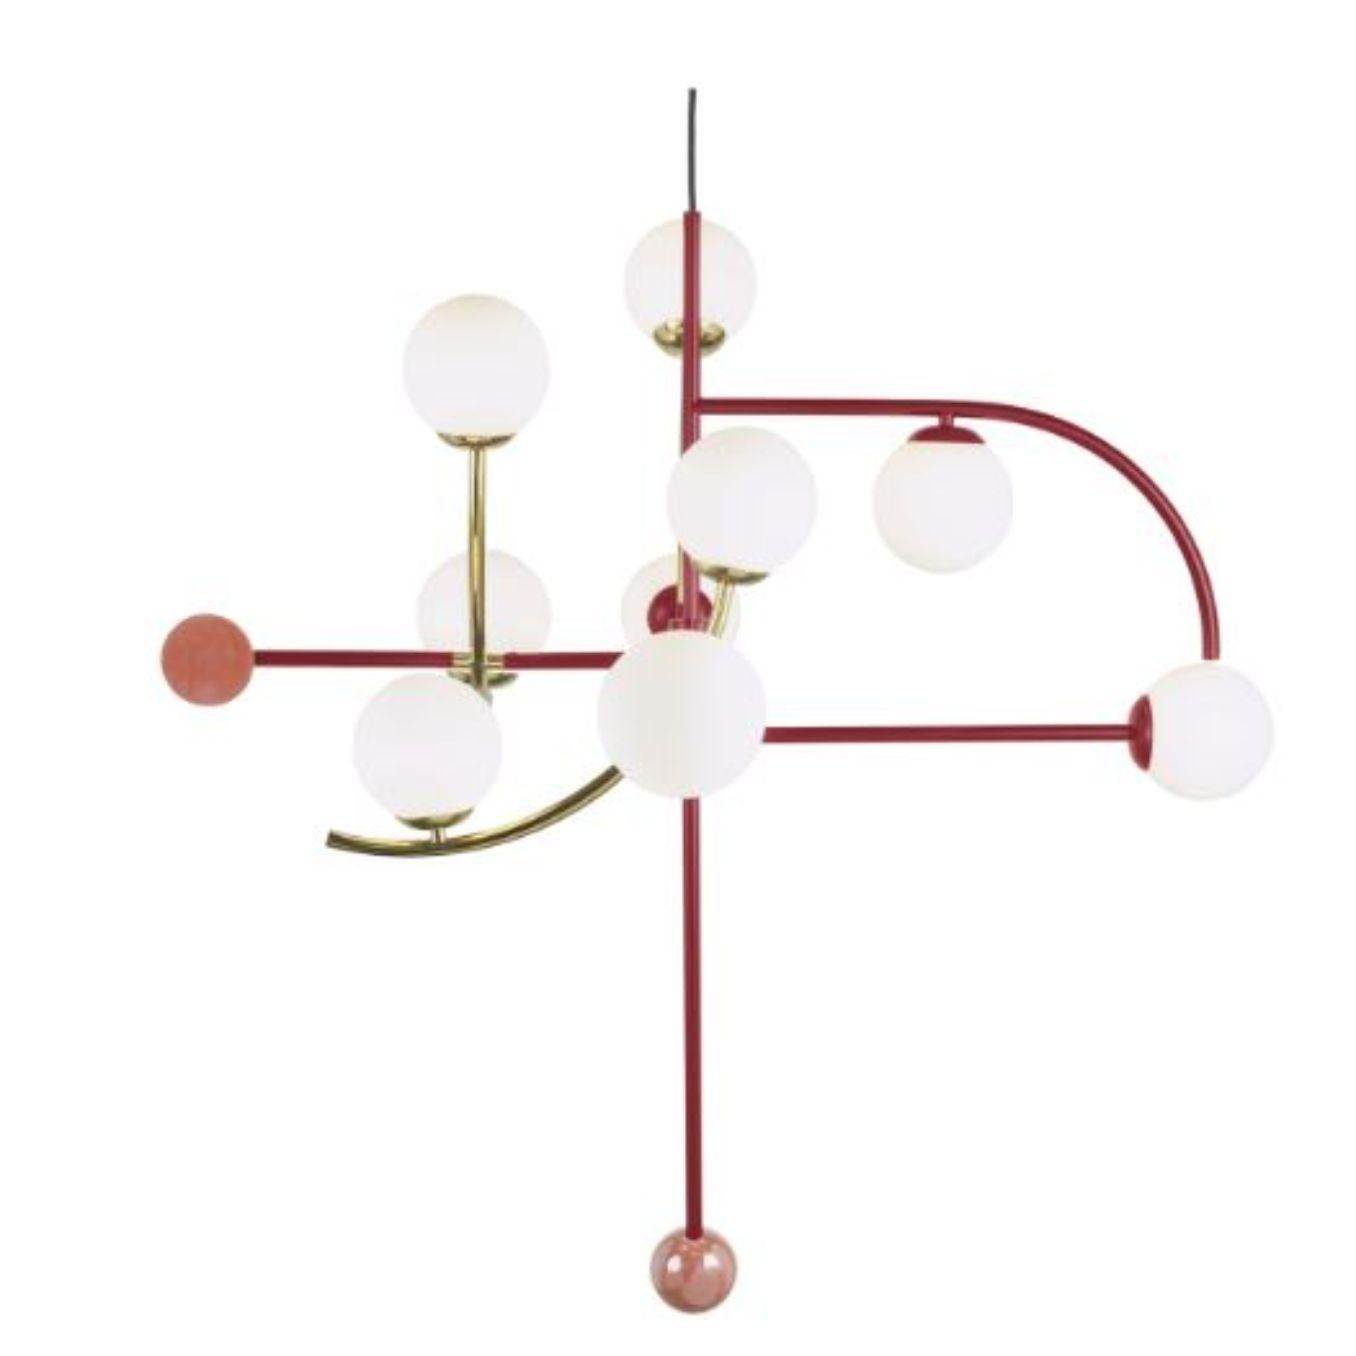 Lipstick Helio I Suspension lamp by Dooq
Dimensions: W 120 x D 93 x H 114 cm
Materials: lacquered metal, brass/nickel.
Also available in different colors and materials. 

Information:
230V/50Hz
9 x max. G9
4W LED

120V/60Hz
9 x max. G9
4W